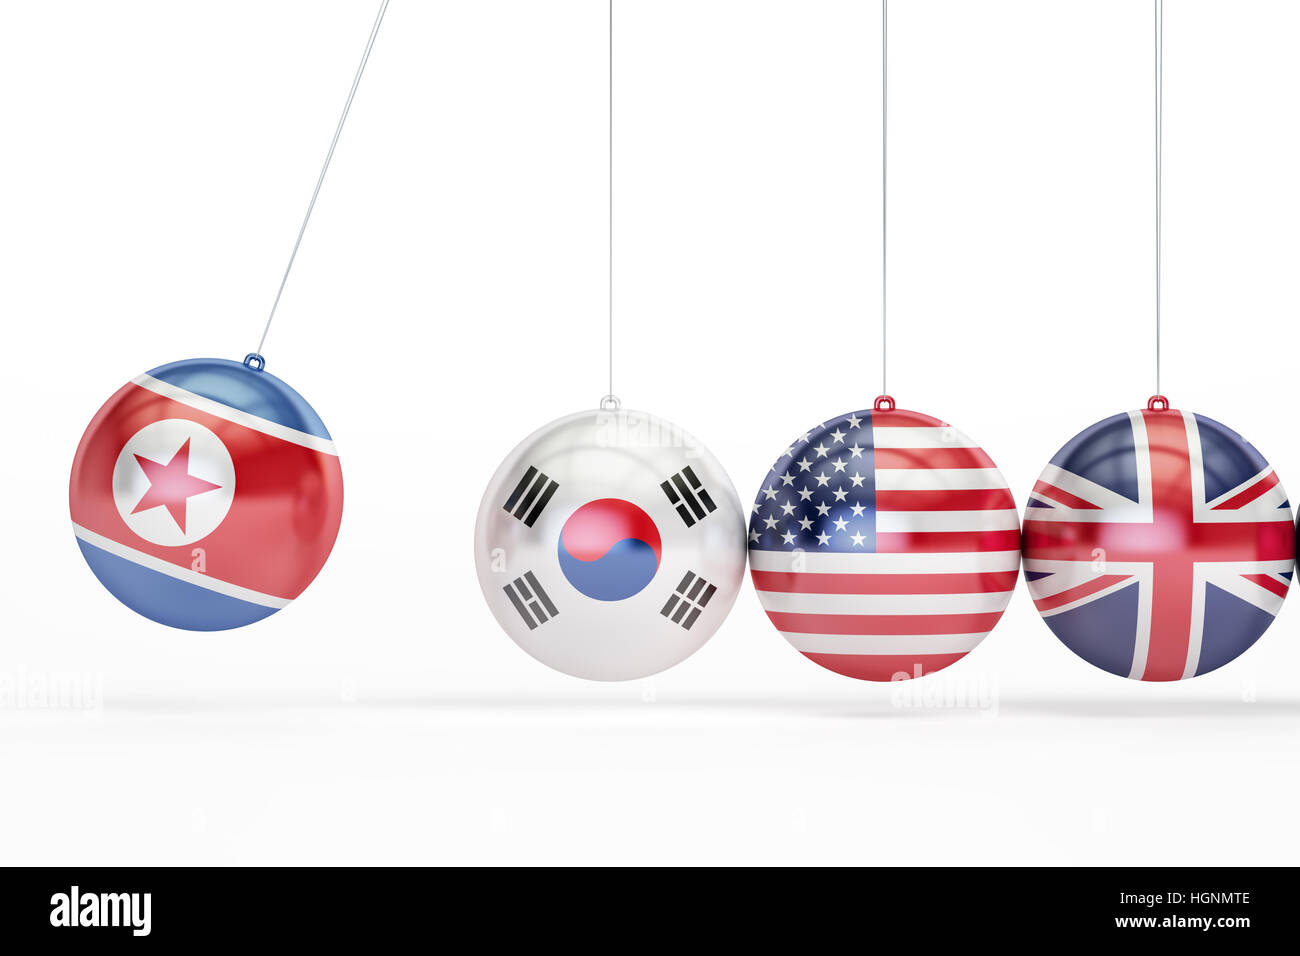 North Korea, South Korea, USA, Great Britain political conflict concept. 3D rendering isolated on white background Stock Photo